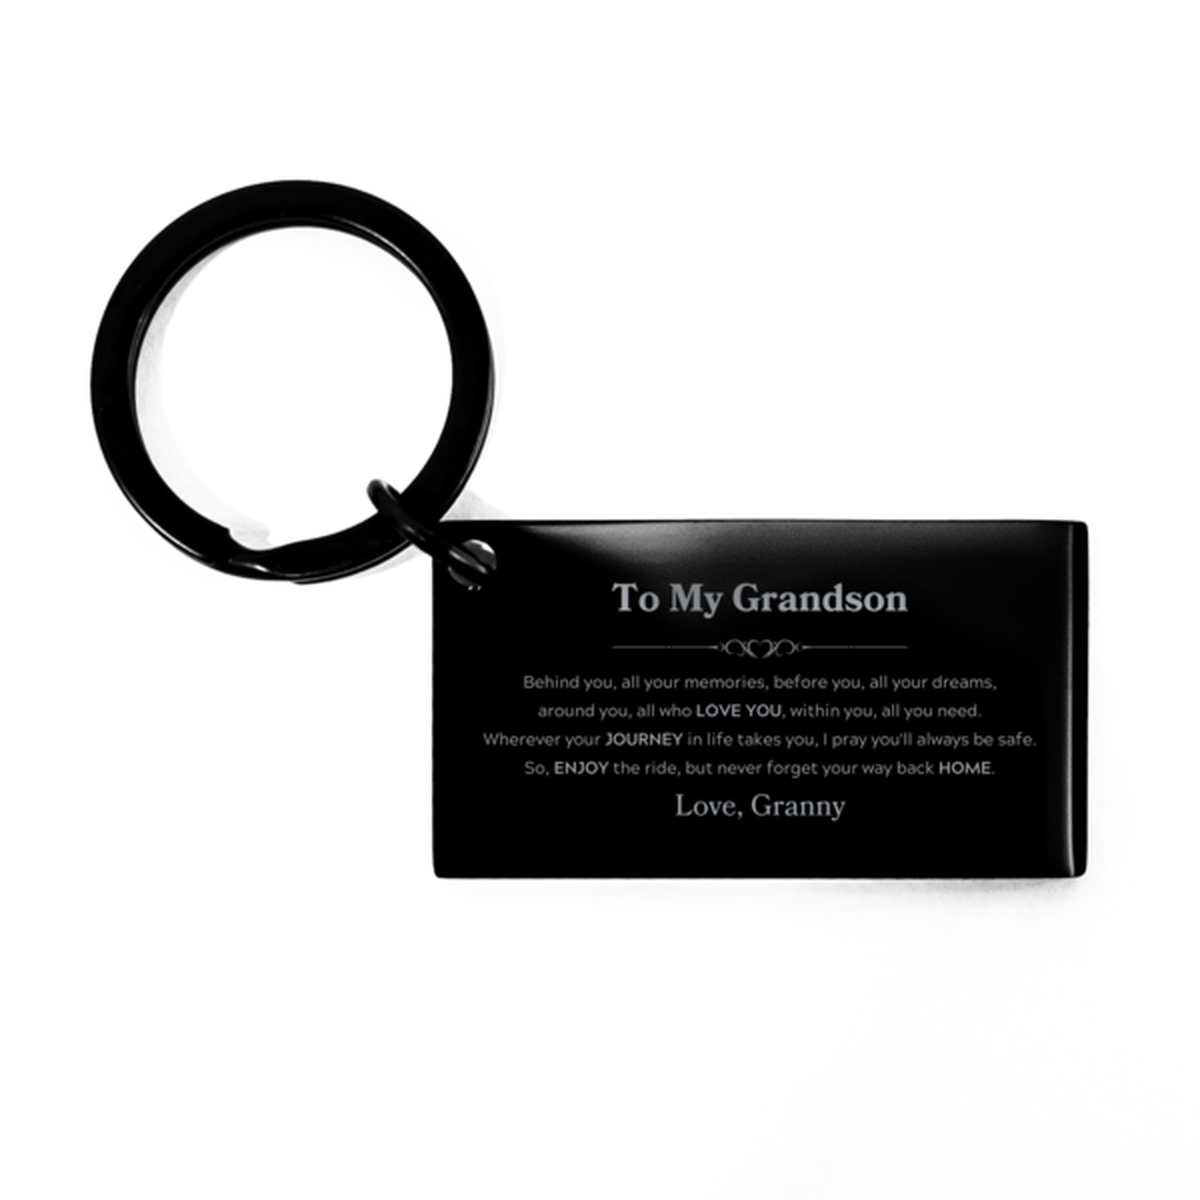 To My Grandson Graduation Gifts from Granny, Grandson Keychain Christmas Birthday Gifts for Grandson Behind you, all your memories, before you, all your dreams. Love, Granny